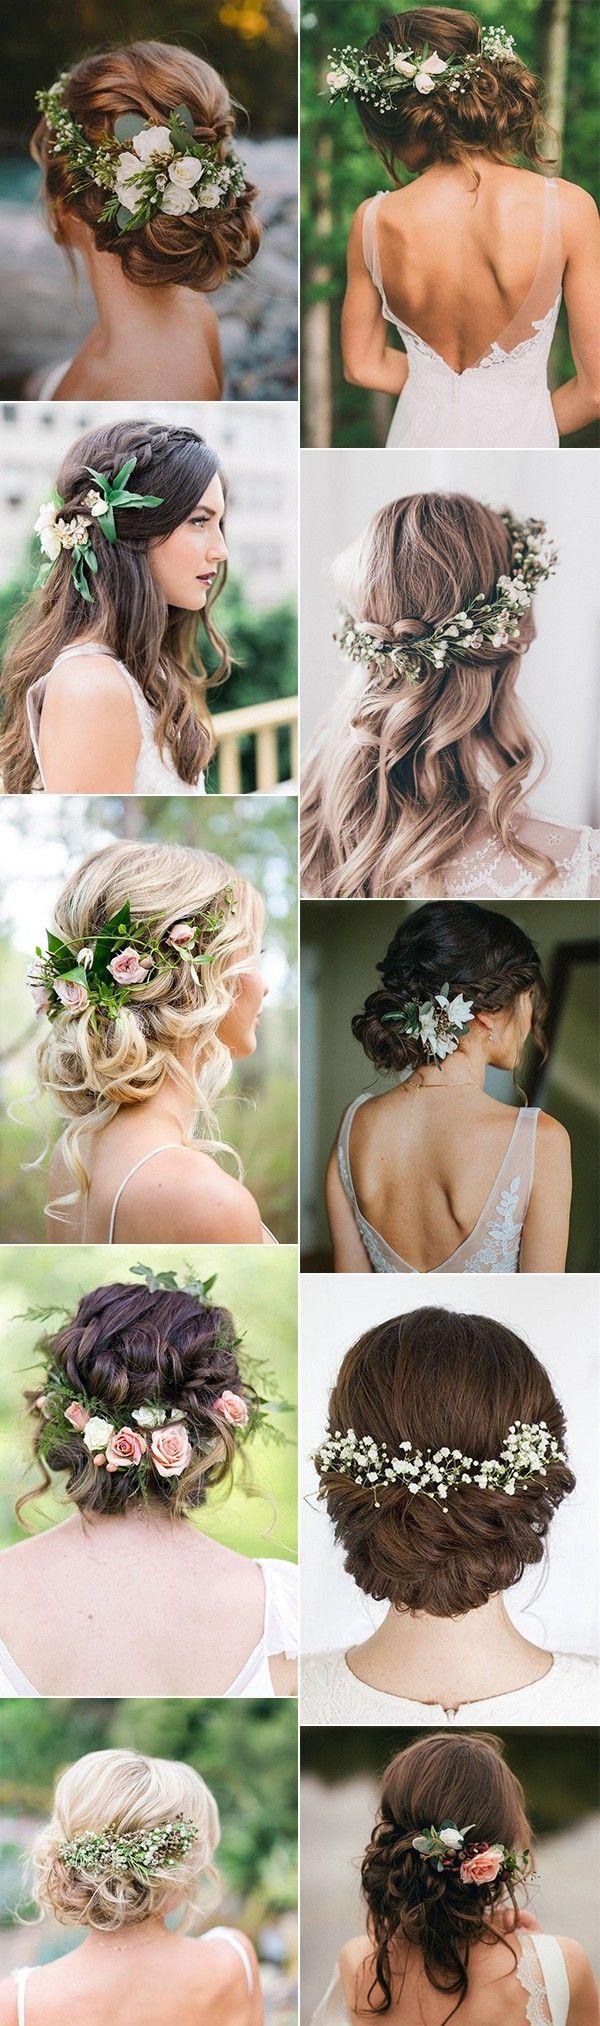 Wedding - 18 Trending Wedding Hairstyles With Flowers - Page 3 Of 3